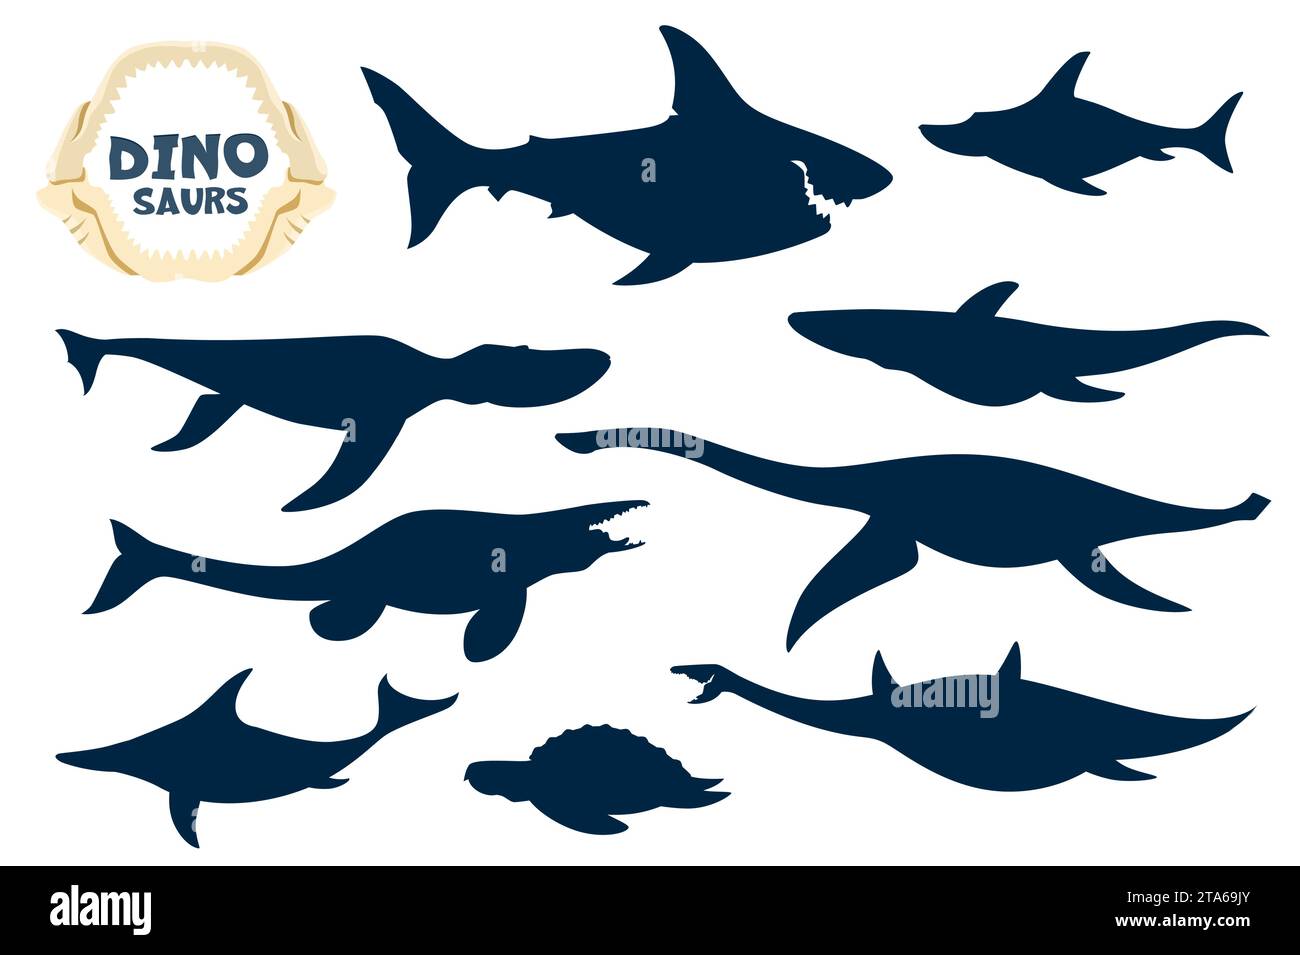 Isolated aquatic dinosaurs cartoon personages silhouettes. Megalodon, Ophthalmosaurus, Liopleurodon and Kronosaurus, Tylosaurus, Plesiosaurus and Ichthyosaur, Archelon sea dinosaurs silhouettes set Stock Vector